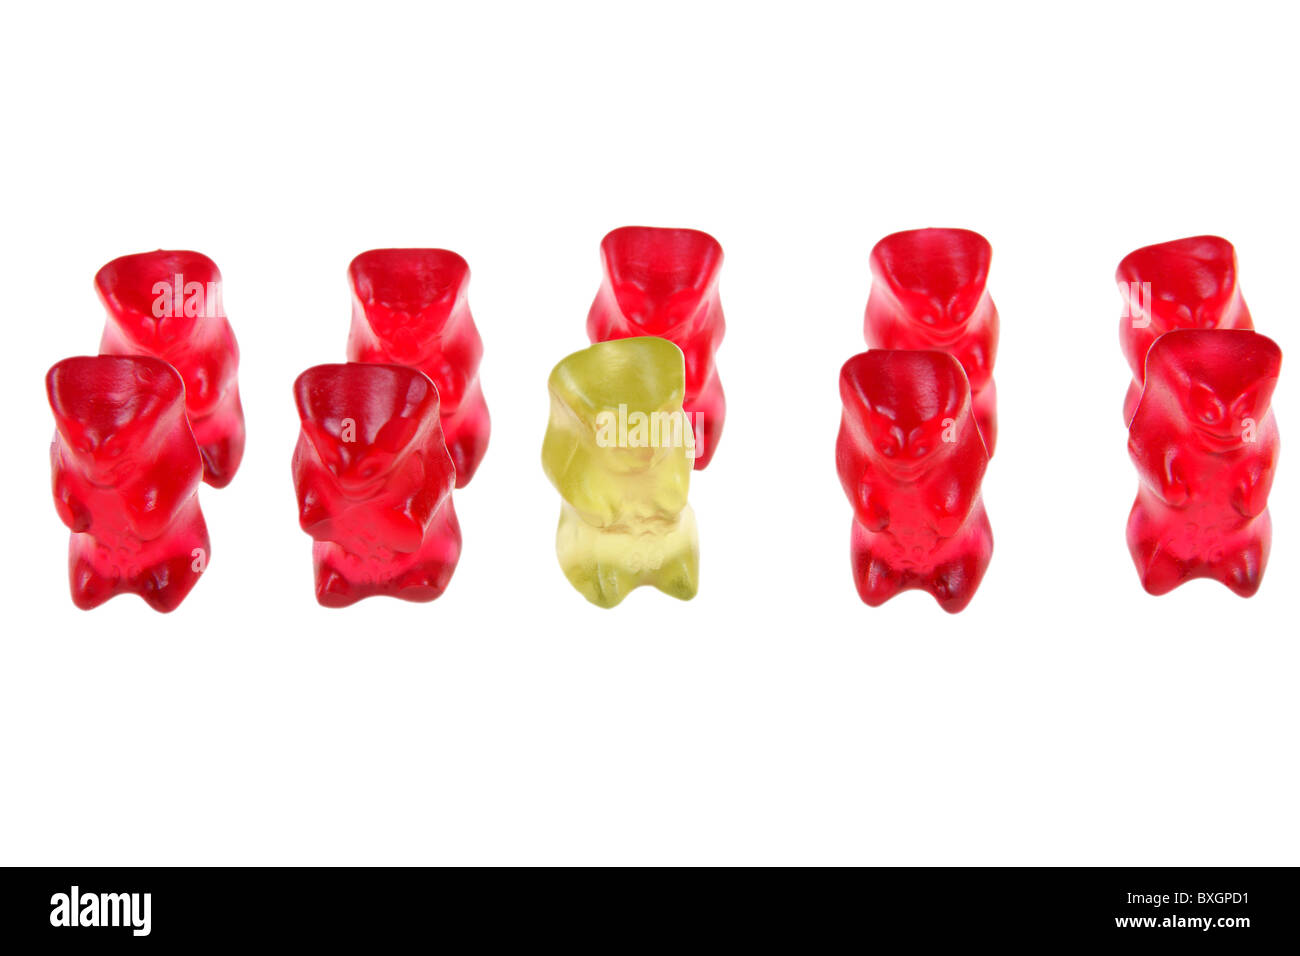 Gummy bears arragment as team isolated on white background Stock Photo